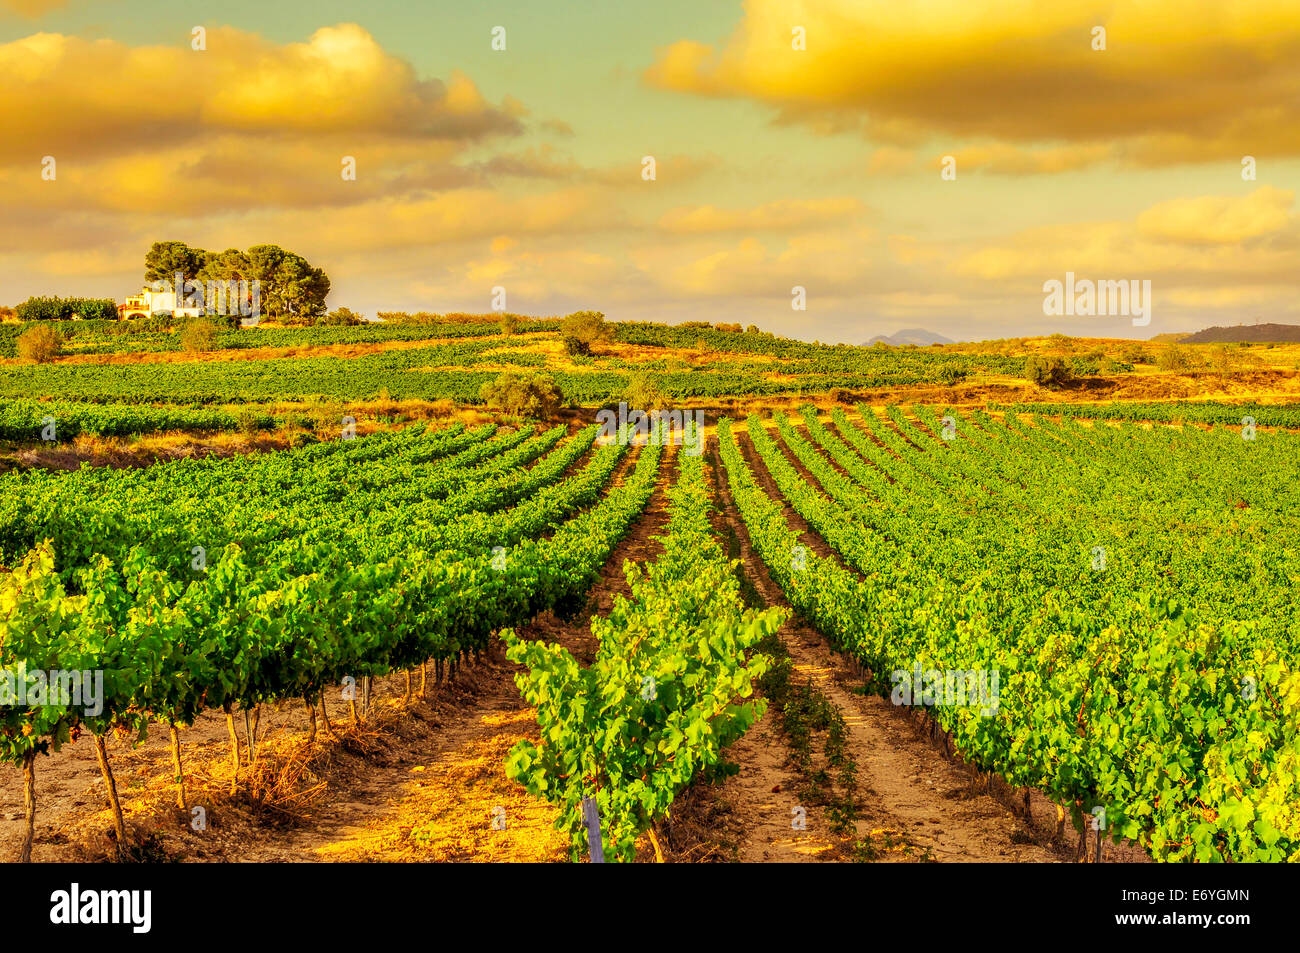 view of a vineyard with ripe grapes in a mediterranean country at sunset Stock Photo